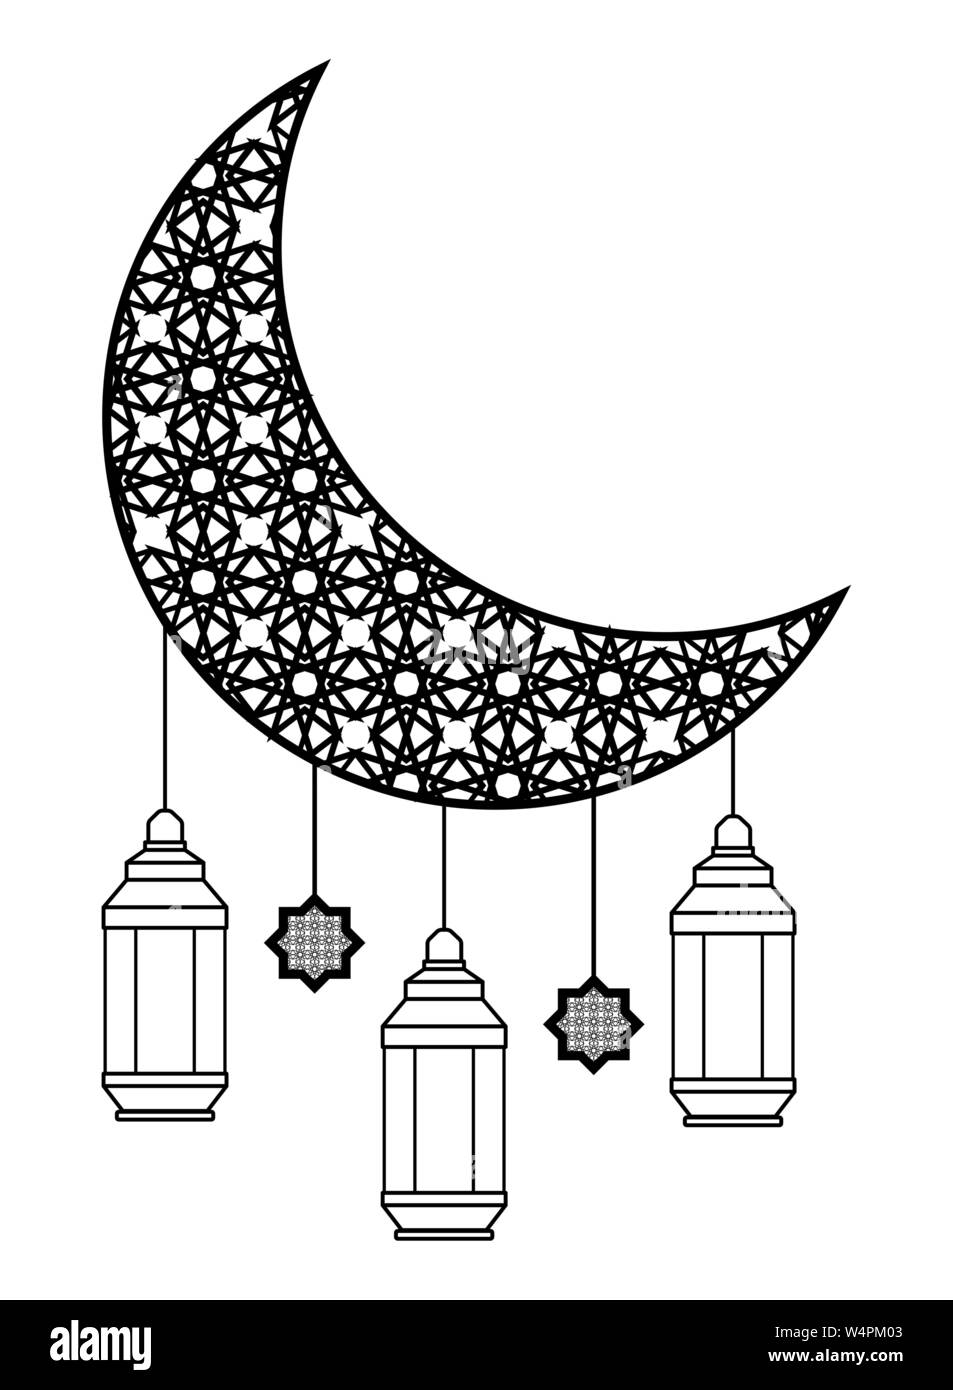 Moon drawing with antique lanterns hanging in black and white Stock Vector